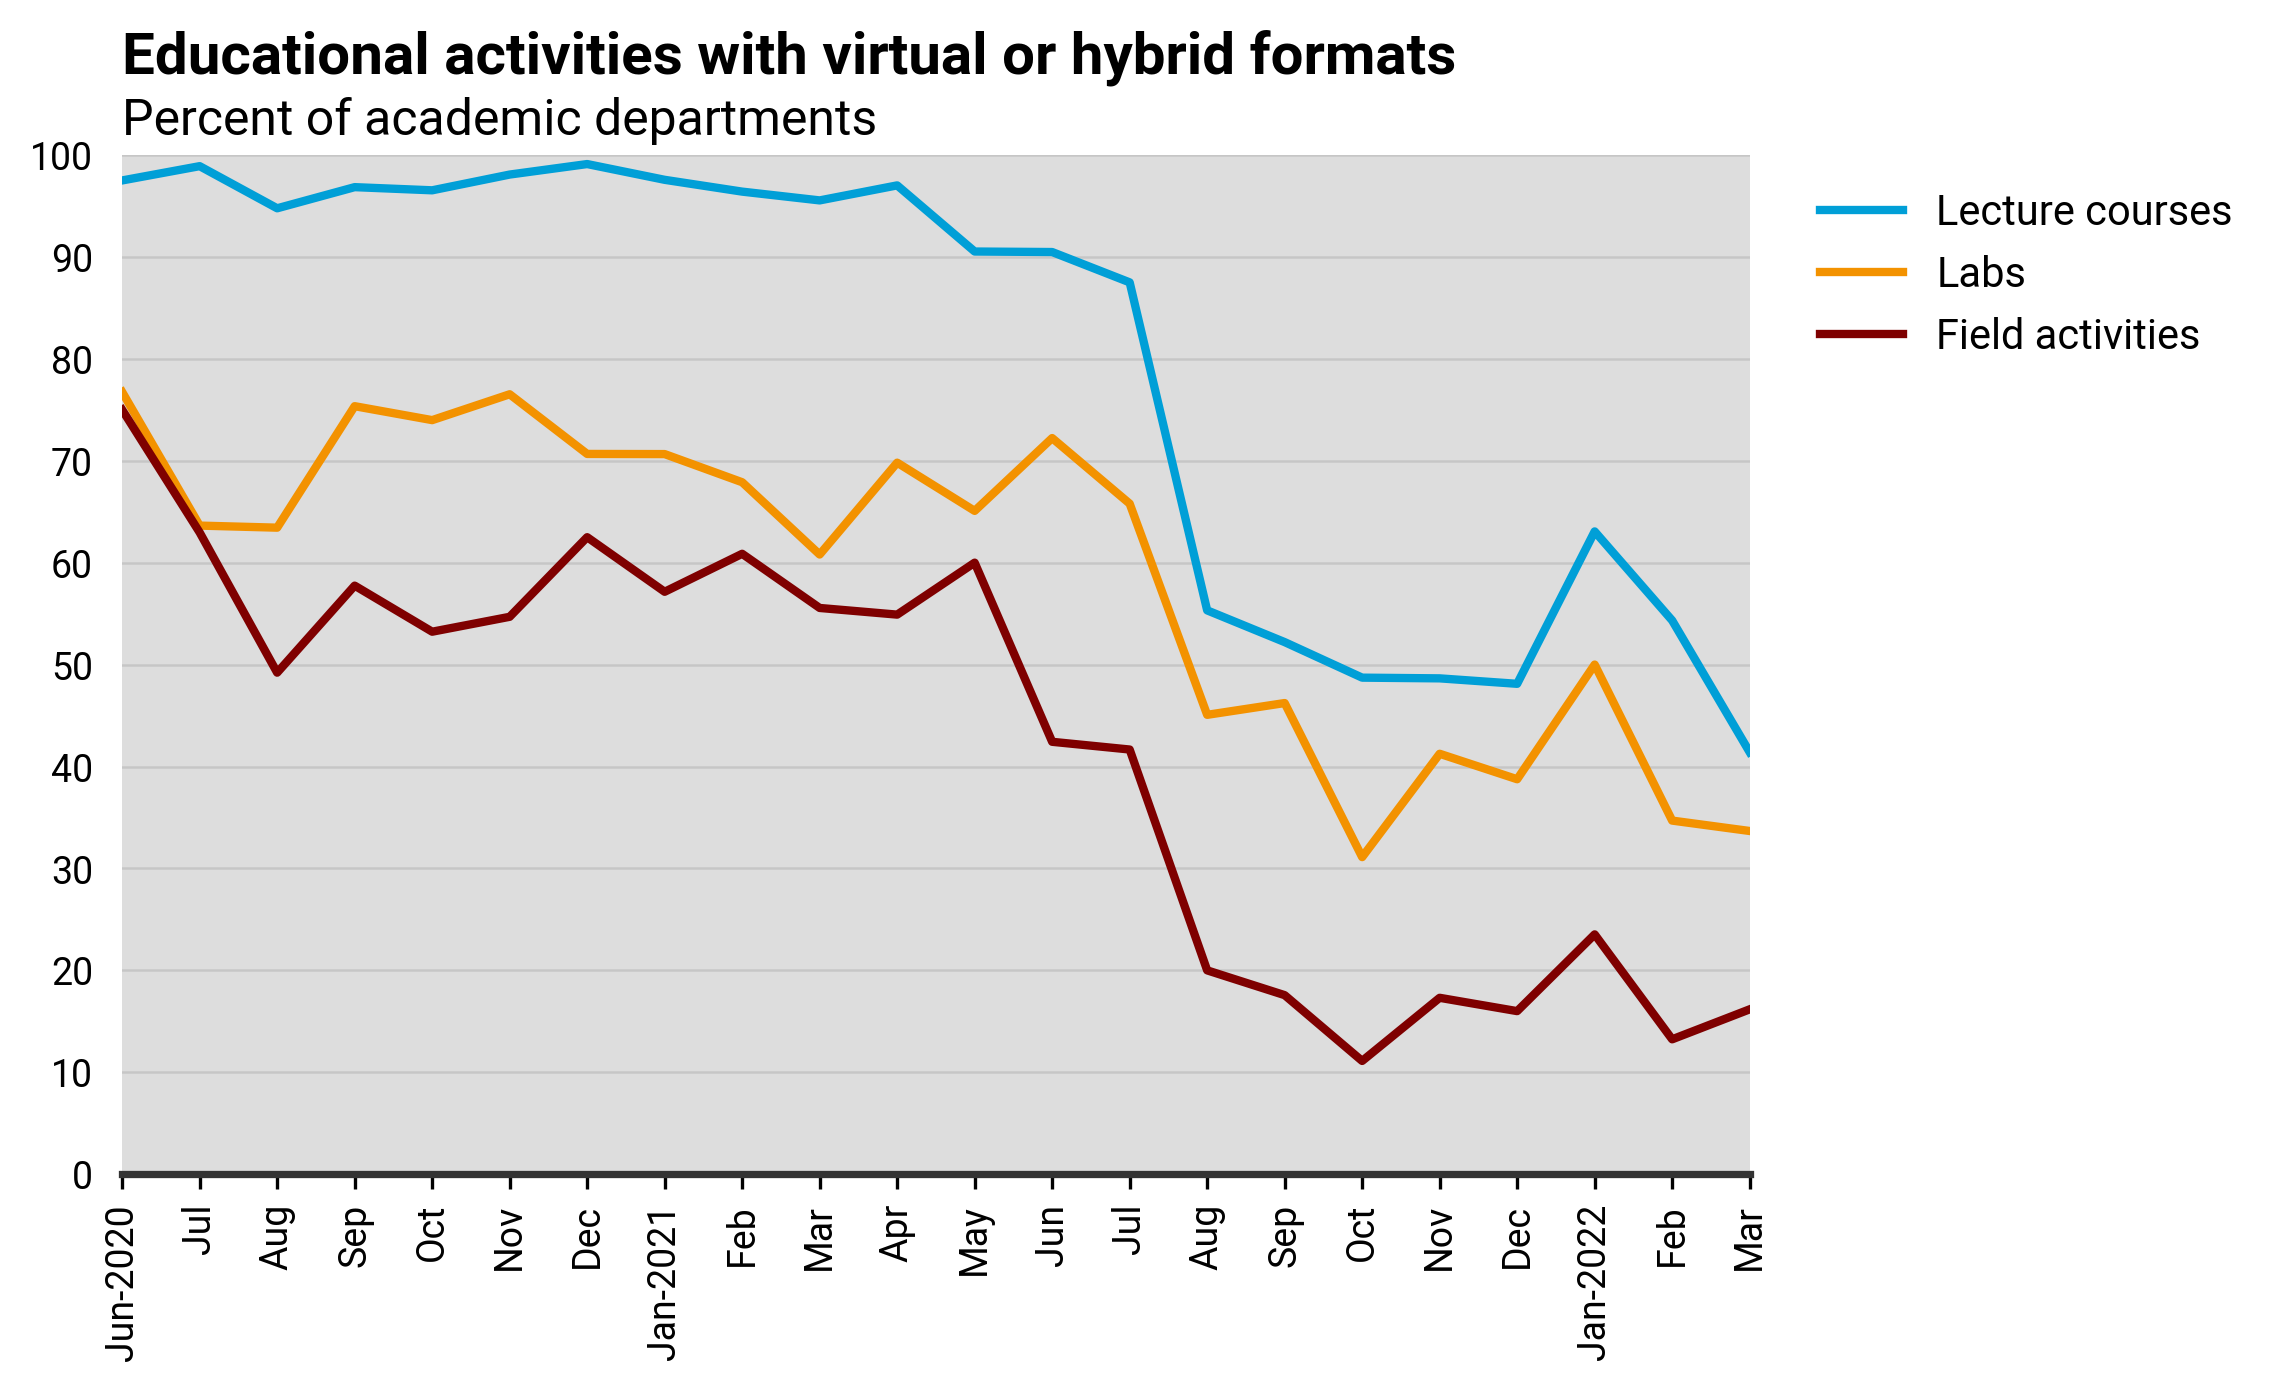 DB_2022-004 chart 07: Educational activities with virtual or hybrid formats (Credit: AGI; data from AGI&#039;s Geoscience COVID-19 Survey)